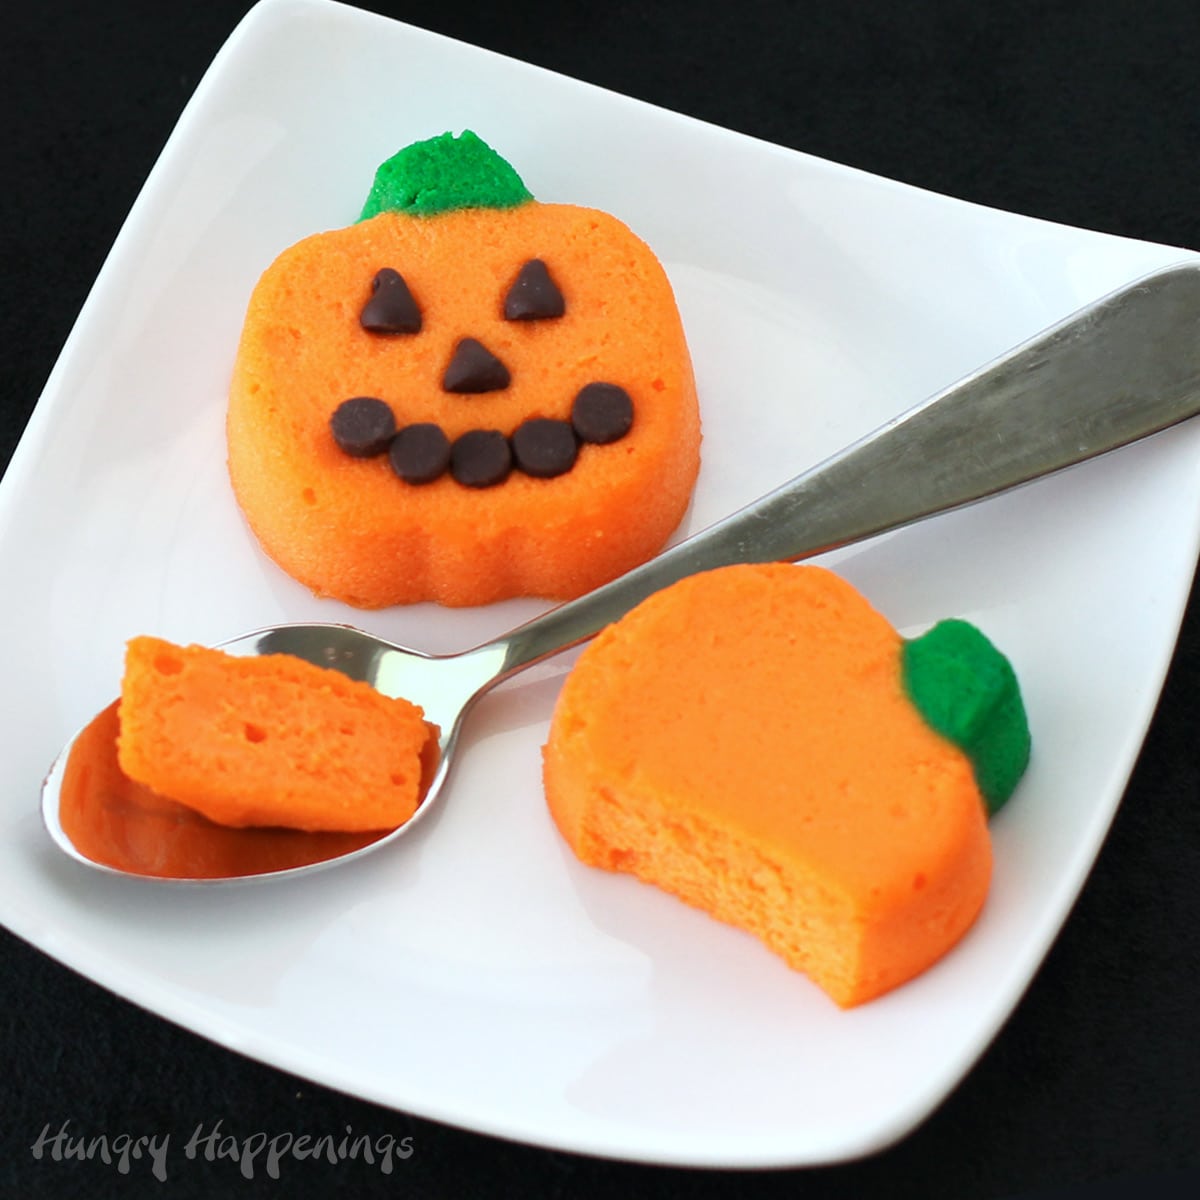 mini cheesecake pumpkins served plain or decorated with chocolate chips to look like a jack-o-lantern on a white square plate with a small spoon.